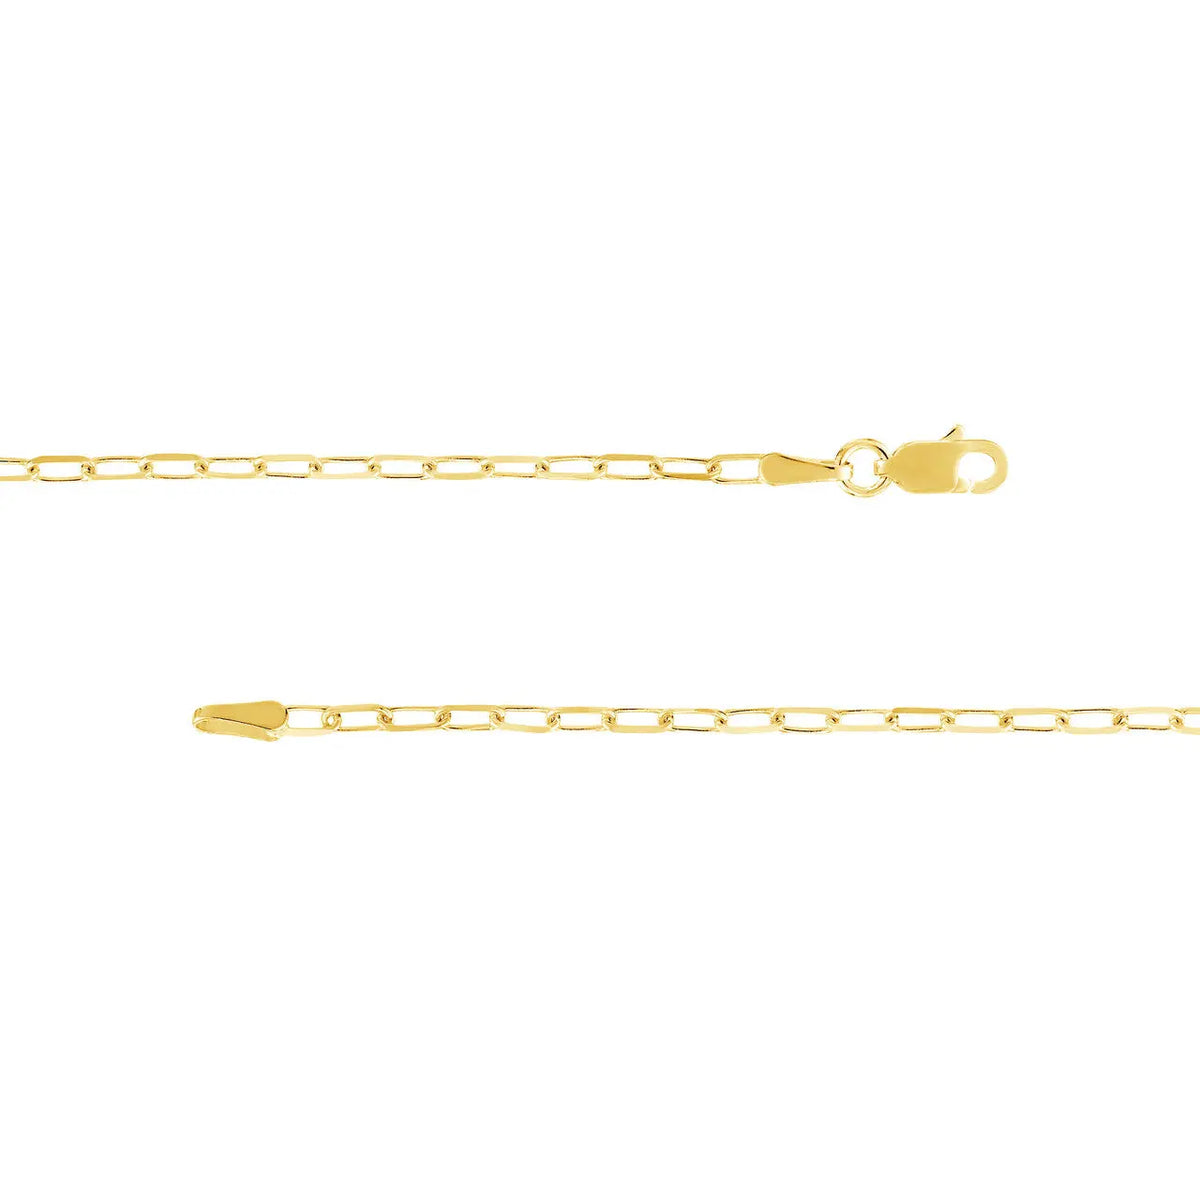 1.95mm Paperclip Chain - The Diamond Shoppe